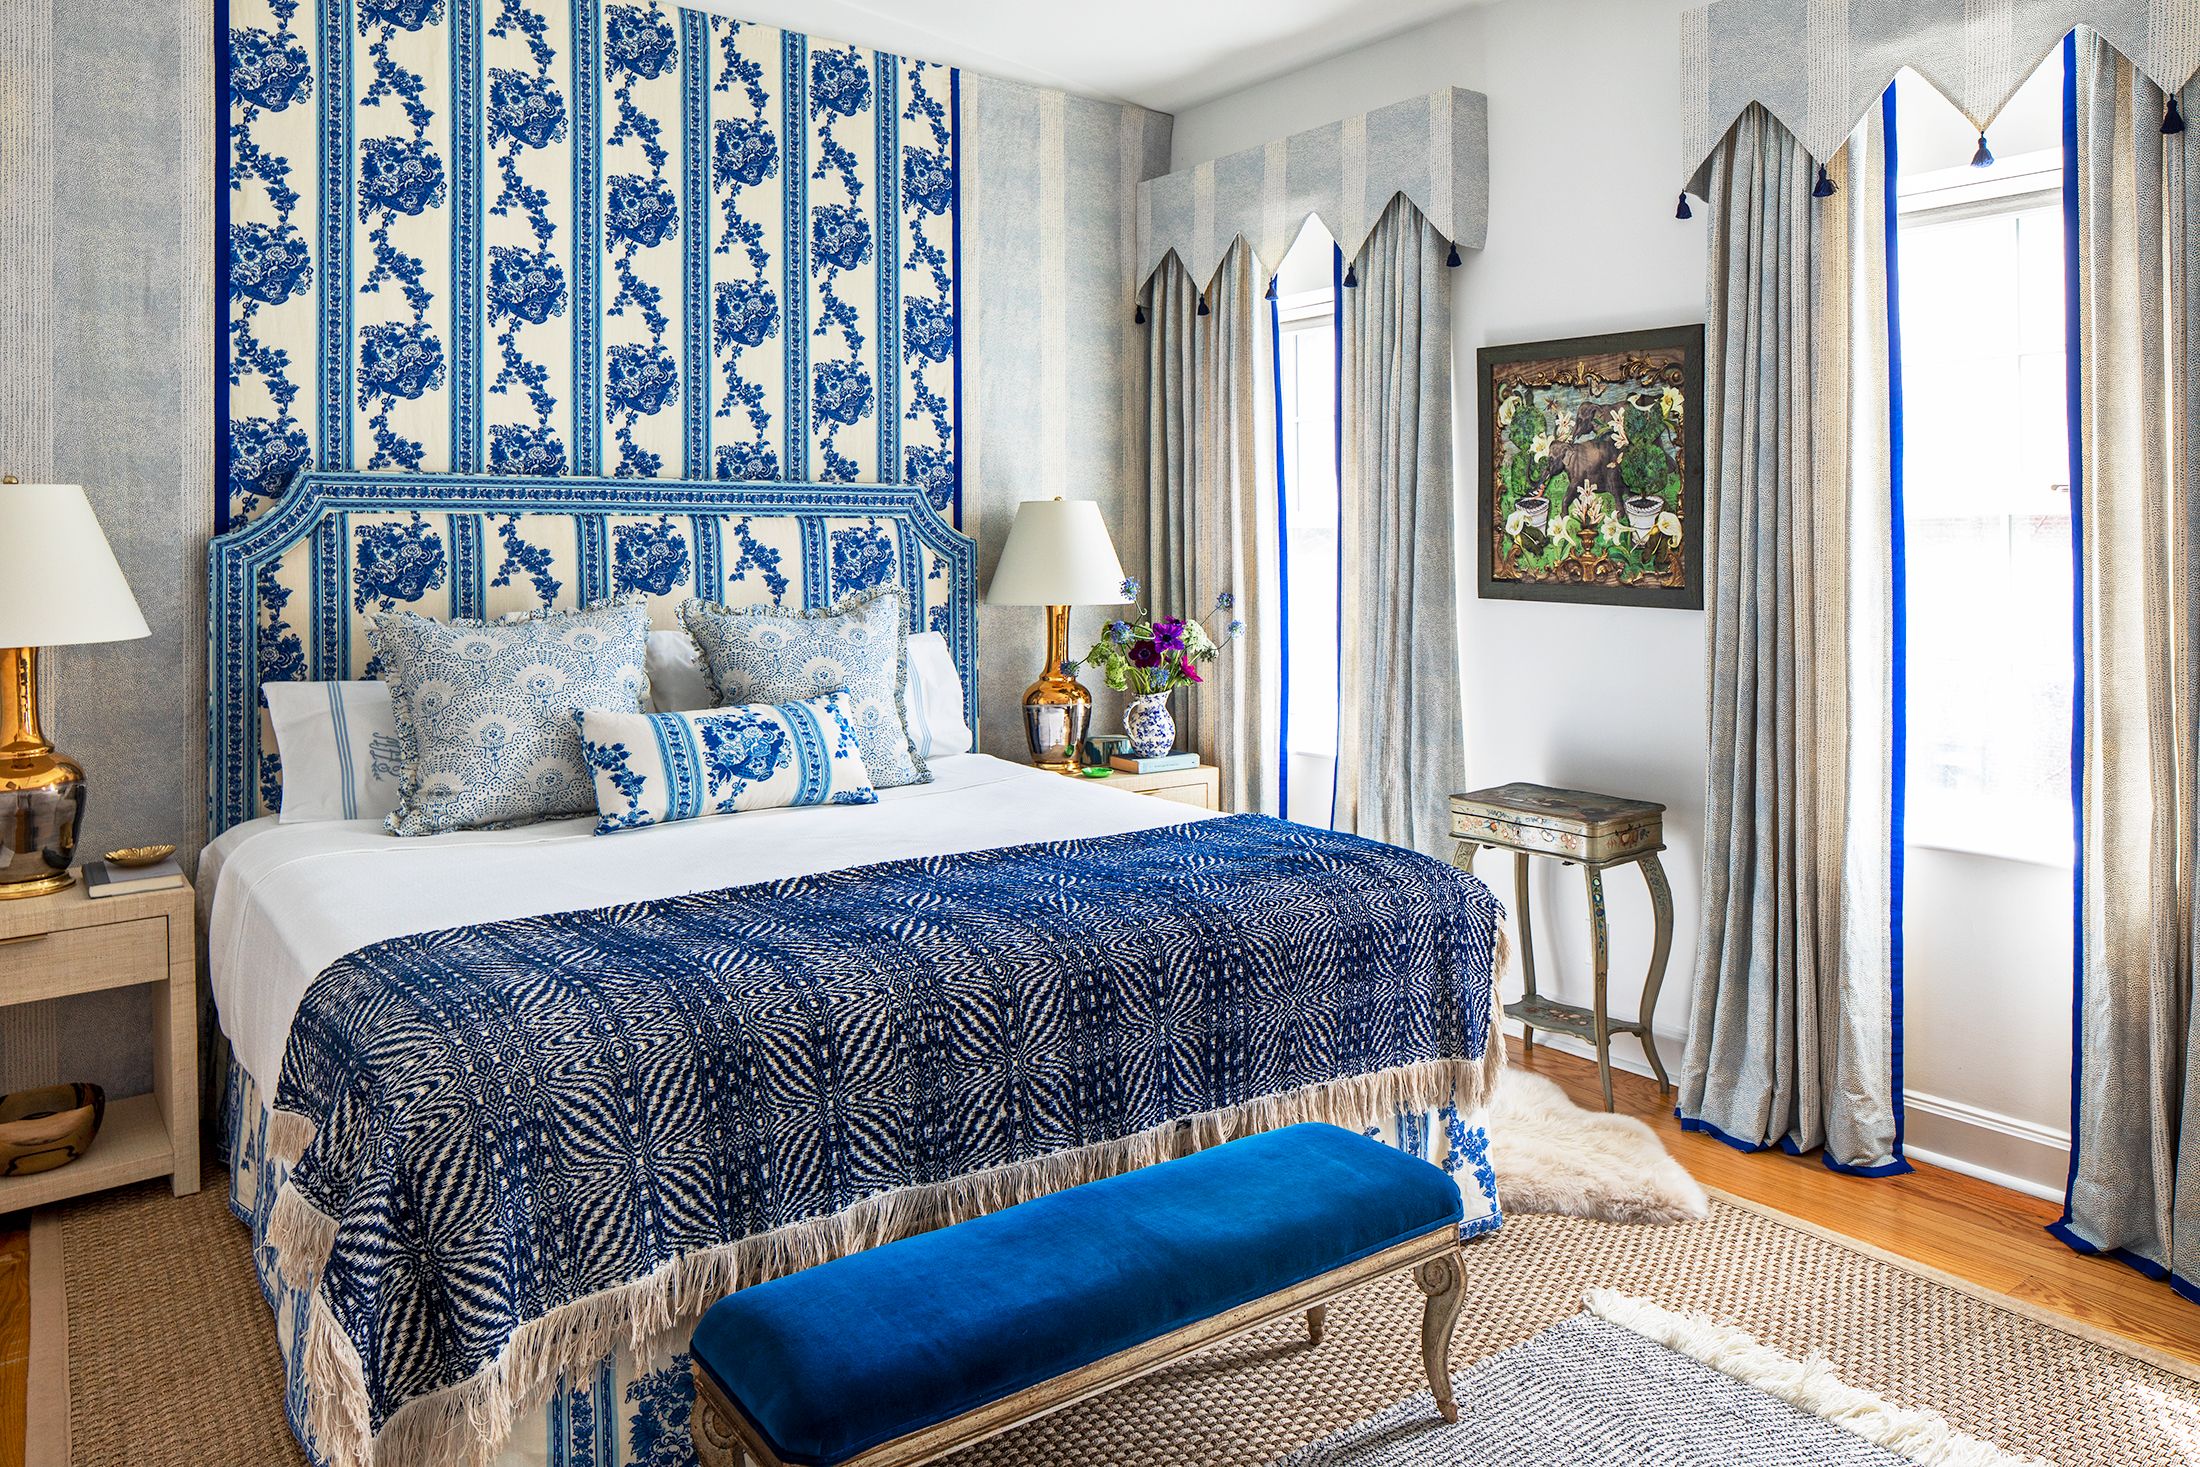 18 Best Blue and White Rooms and Decor - Photos of Pretty Blue and